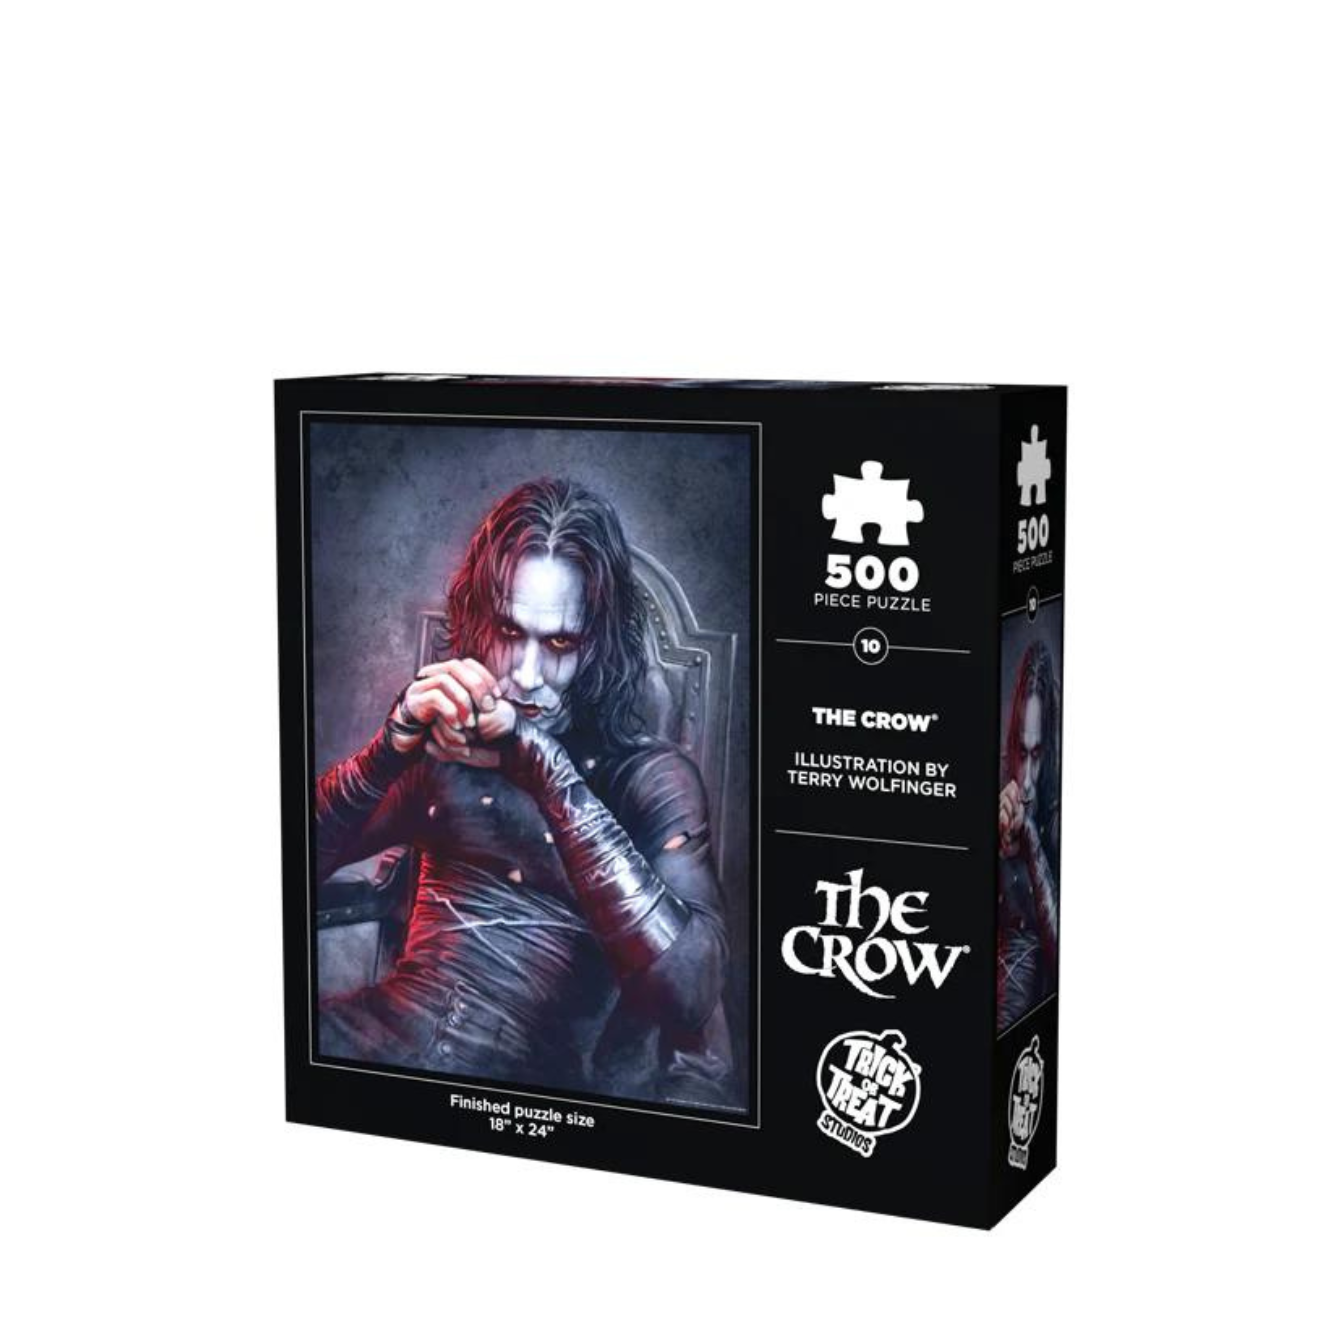 PRE-ORDER THE CROW - 500 PIECE JIGSAW PUZZLE